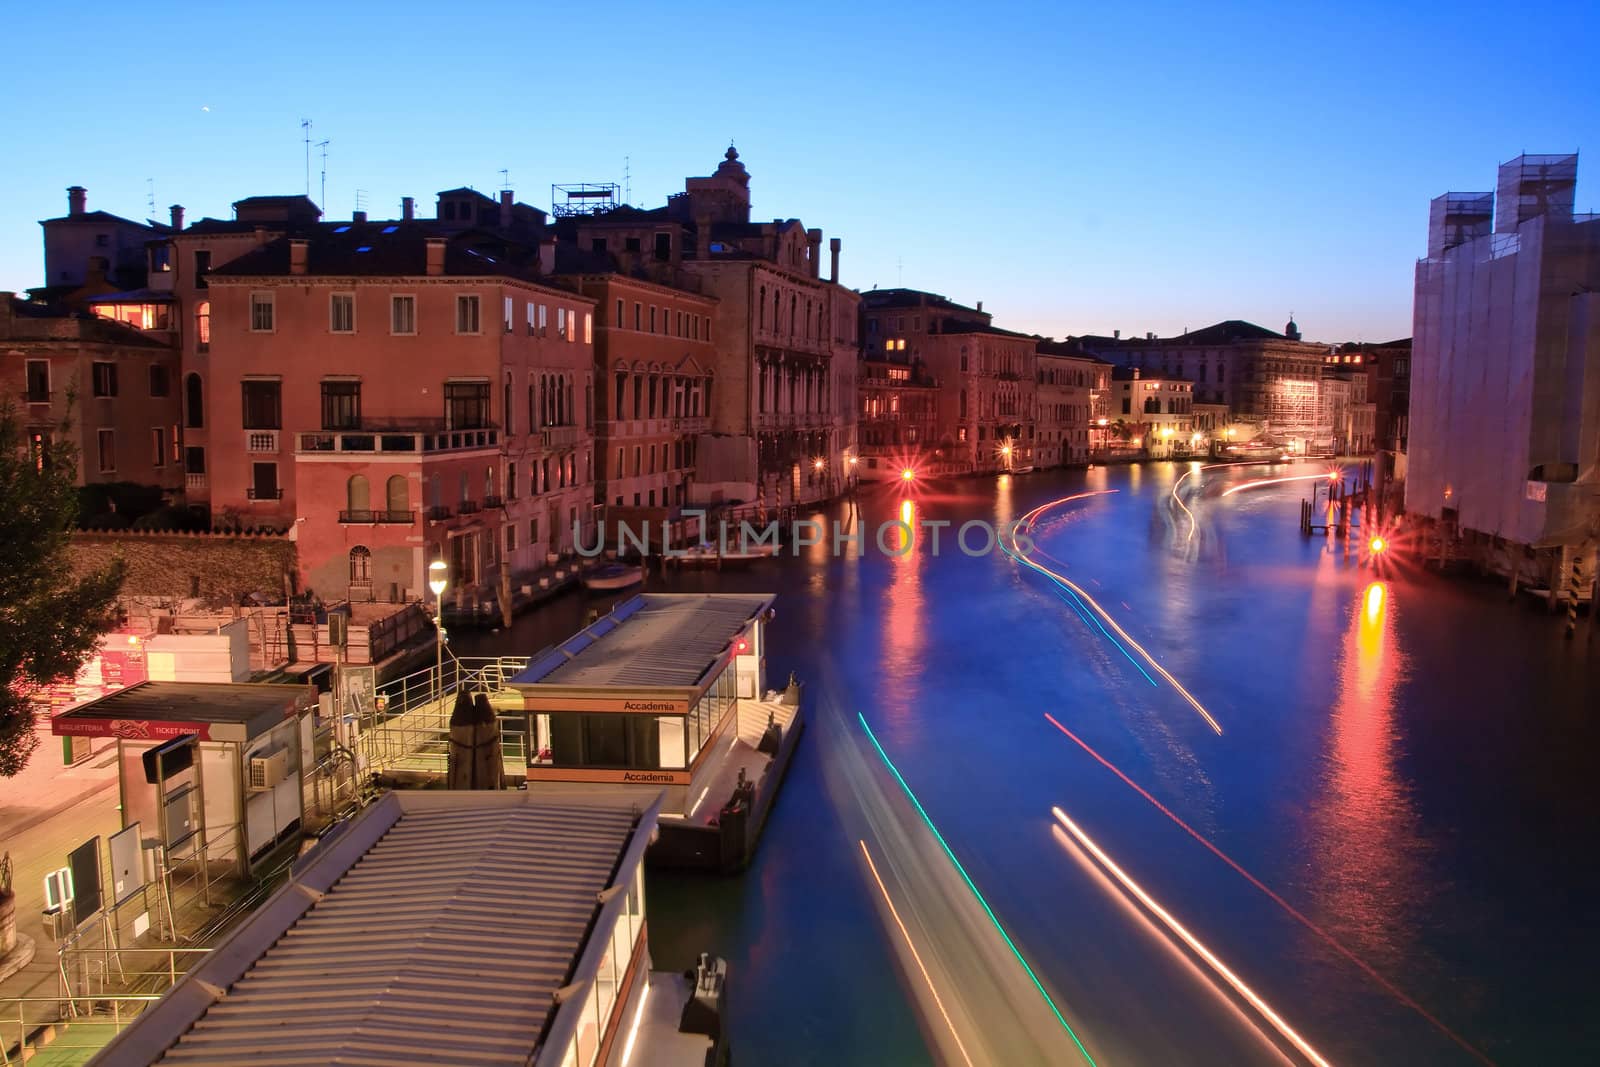 Light Trail of Passenger ship at Grand canal from Accademia bridge at dusk,Venice Italy